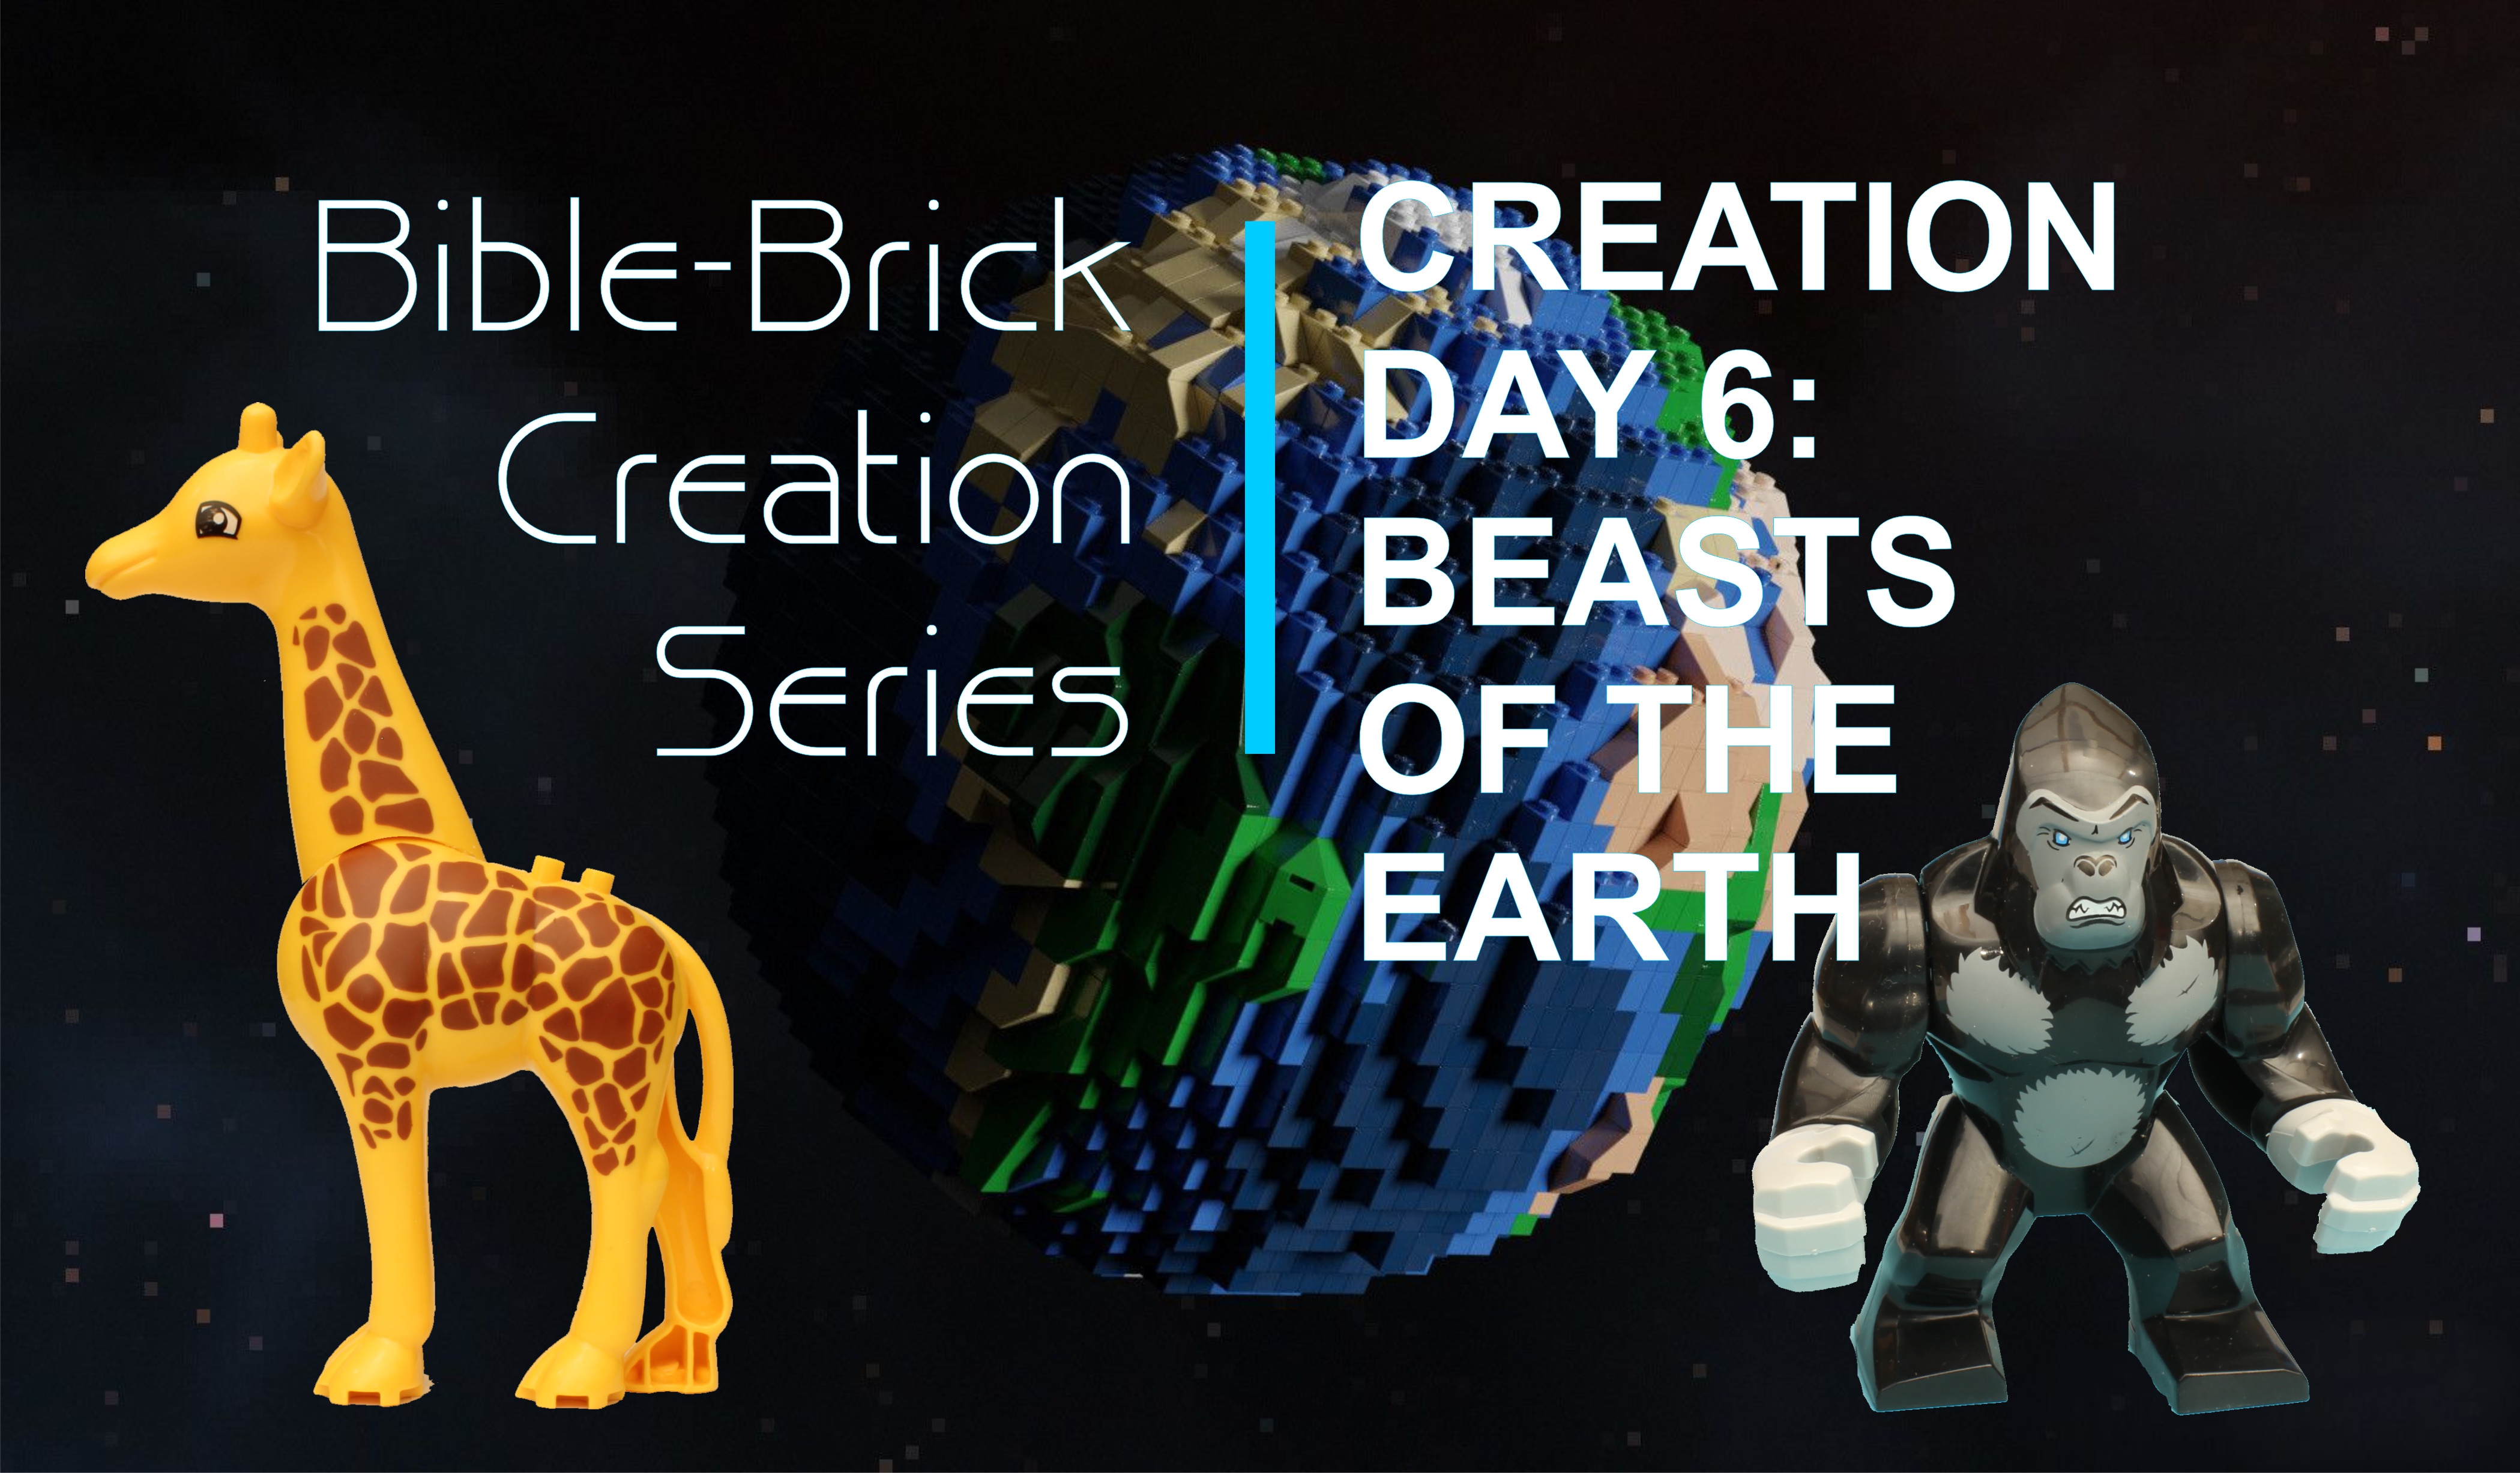 Creation #25 Day 6 Beasts